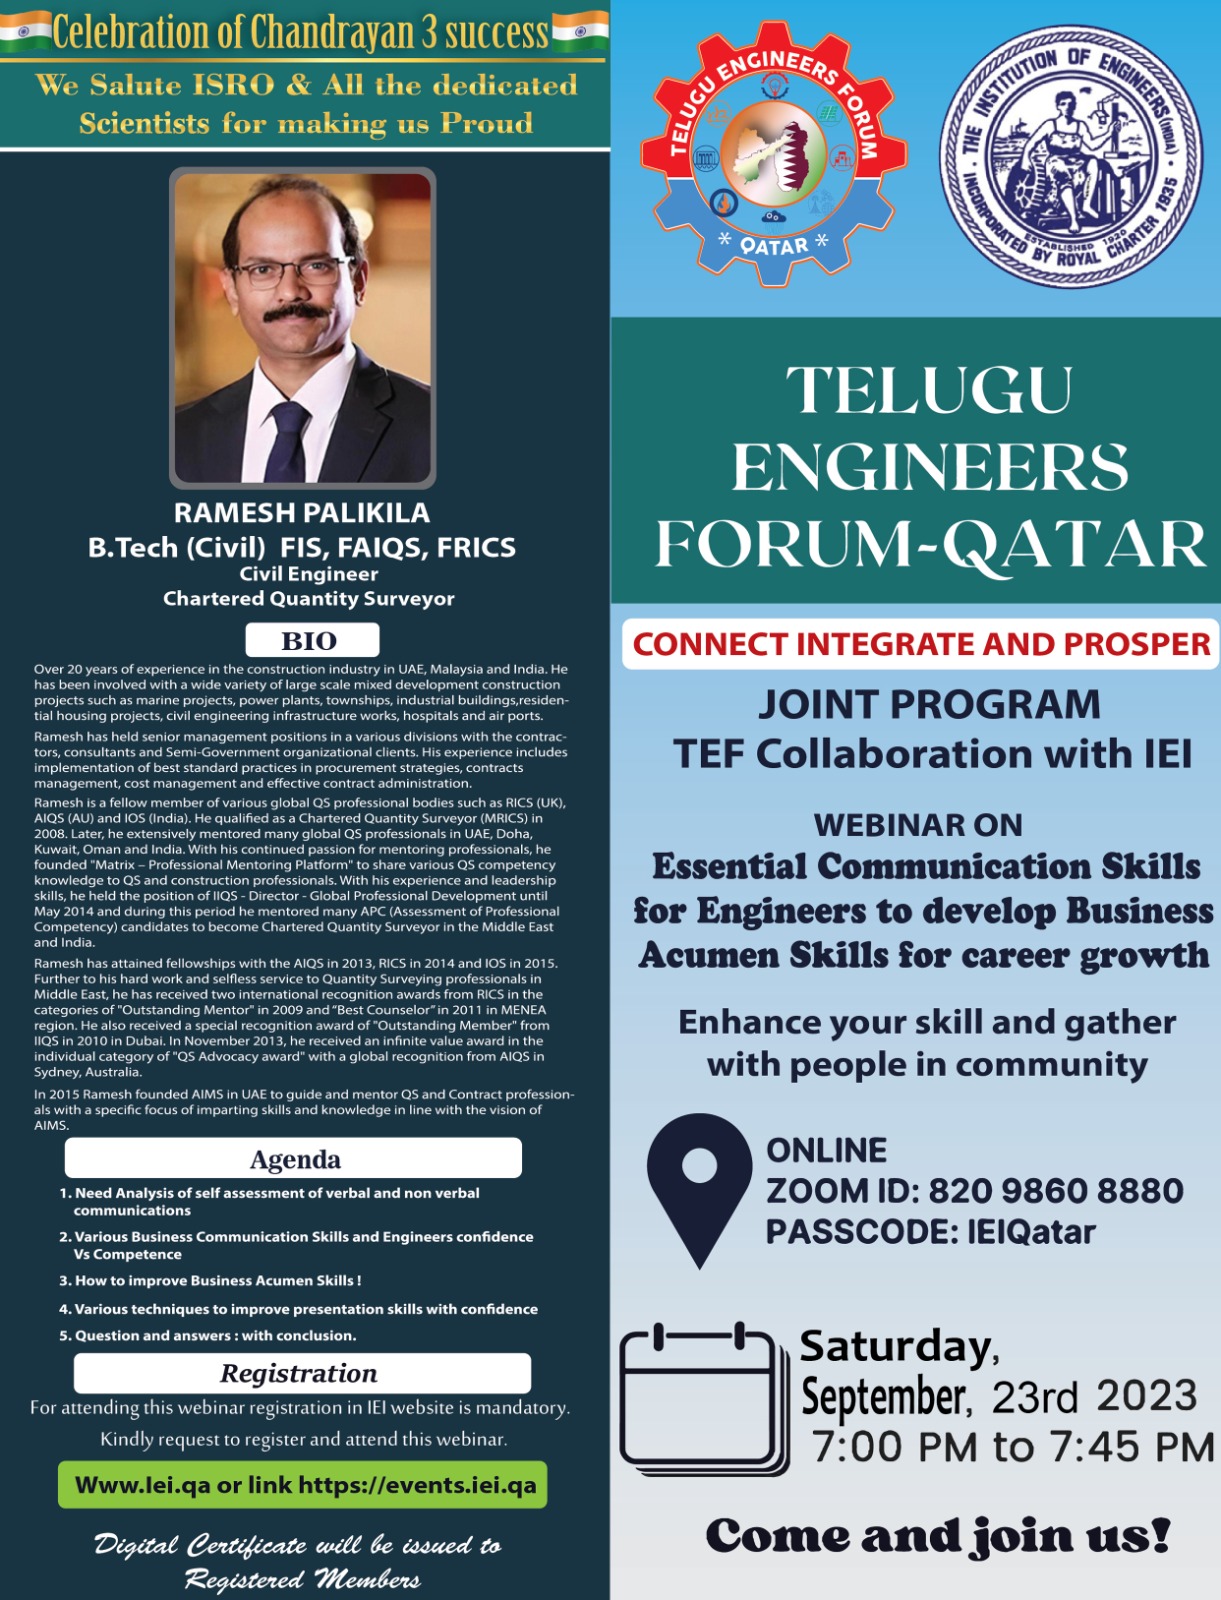 Webinar On Essential Communication Skills for Engineers to develop Business Acumen Skills for career